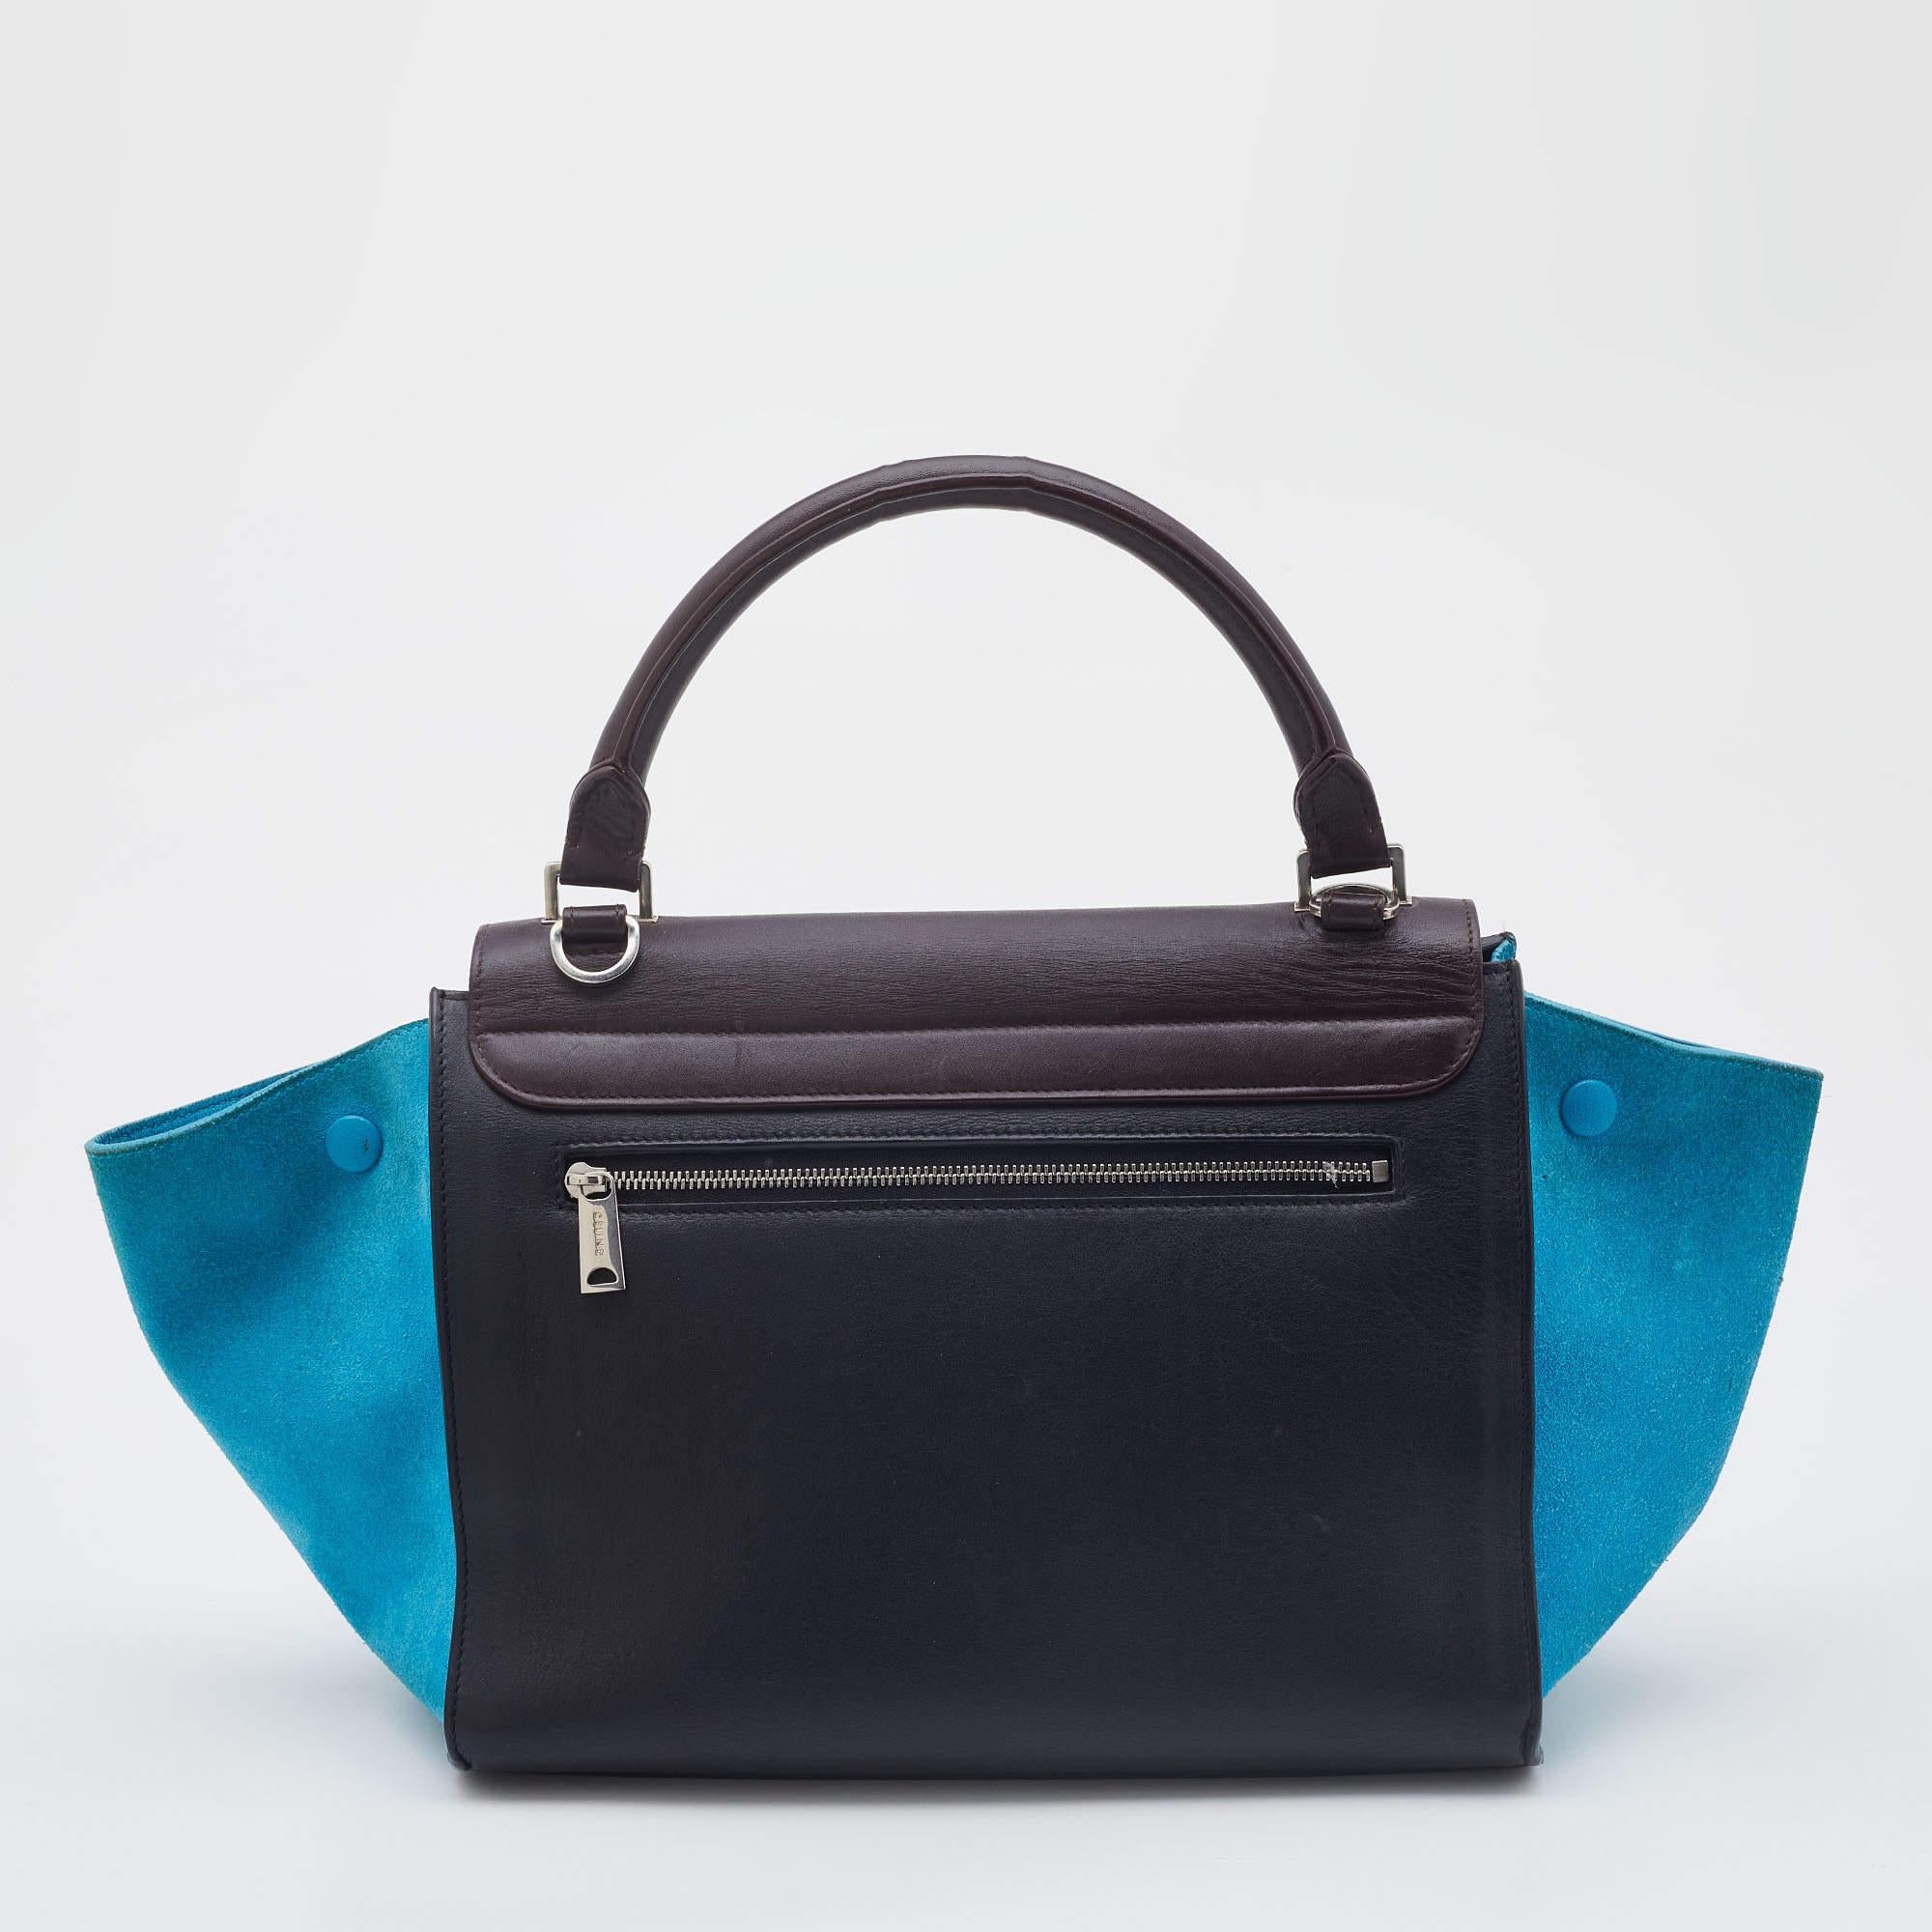 A timeless creation, this bag perfectly balances simplicity with sophistication. It is created from high-quality materials with a top handle to carry it around effortlessly. The perfectly sized interior of this creation will house your belongings in